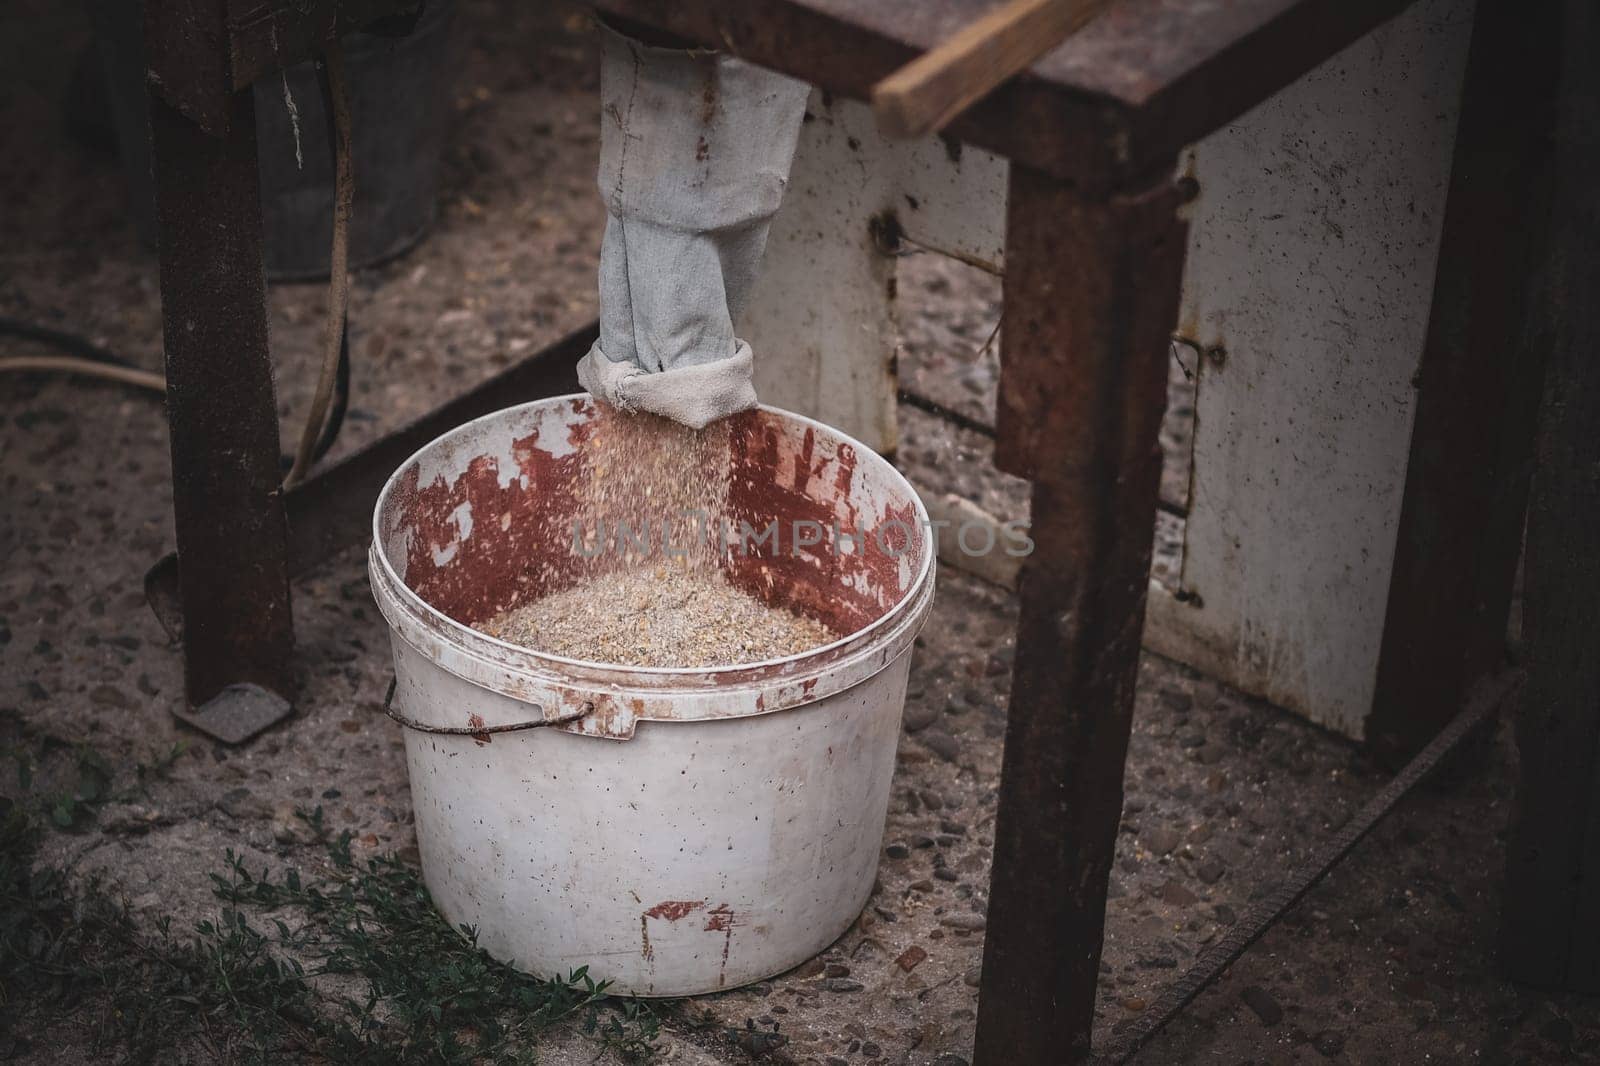 Dry ground animal feed from grains is poured into an old dirty bucket standing at the bottom of a homemade crusher on the street of a village house in the countryside, close-up side view in dark style.